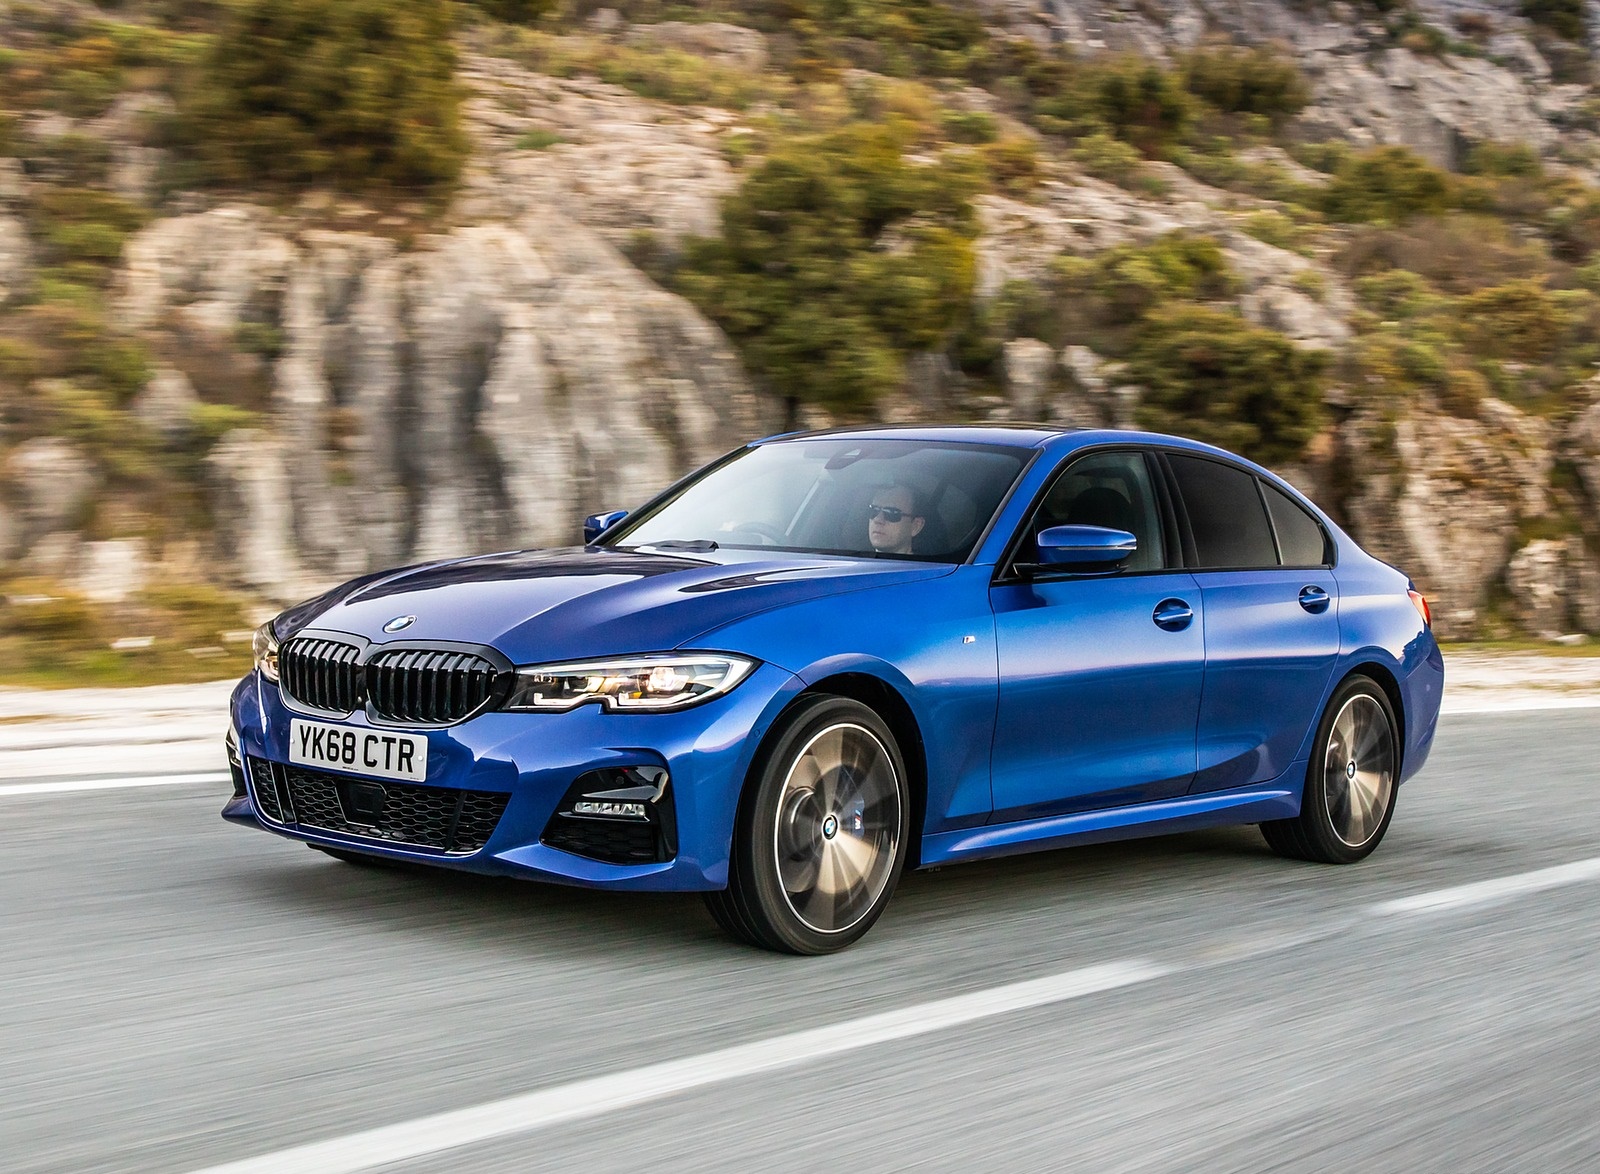 2019 BMW 3-Series Saloon 320d xDrive (UK-Spec) Front Three-Quarter Wallpapers #22 of 46